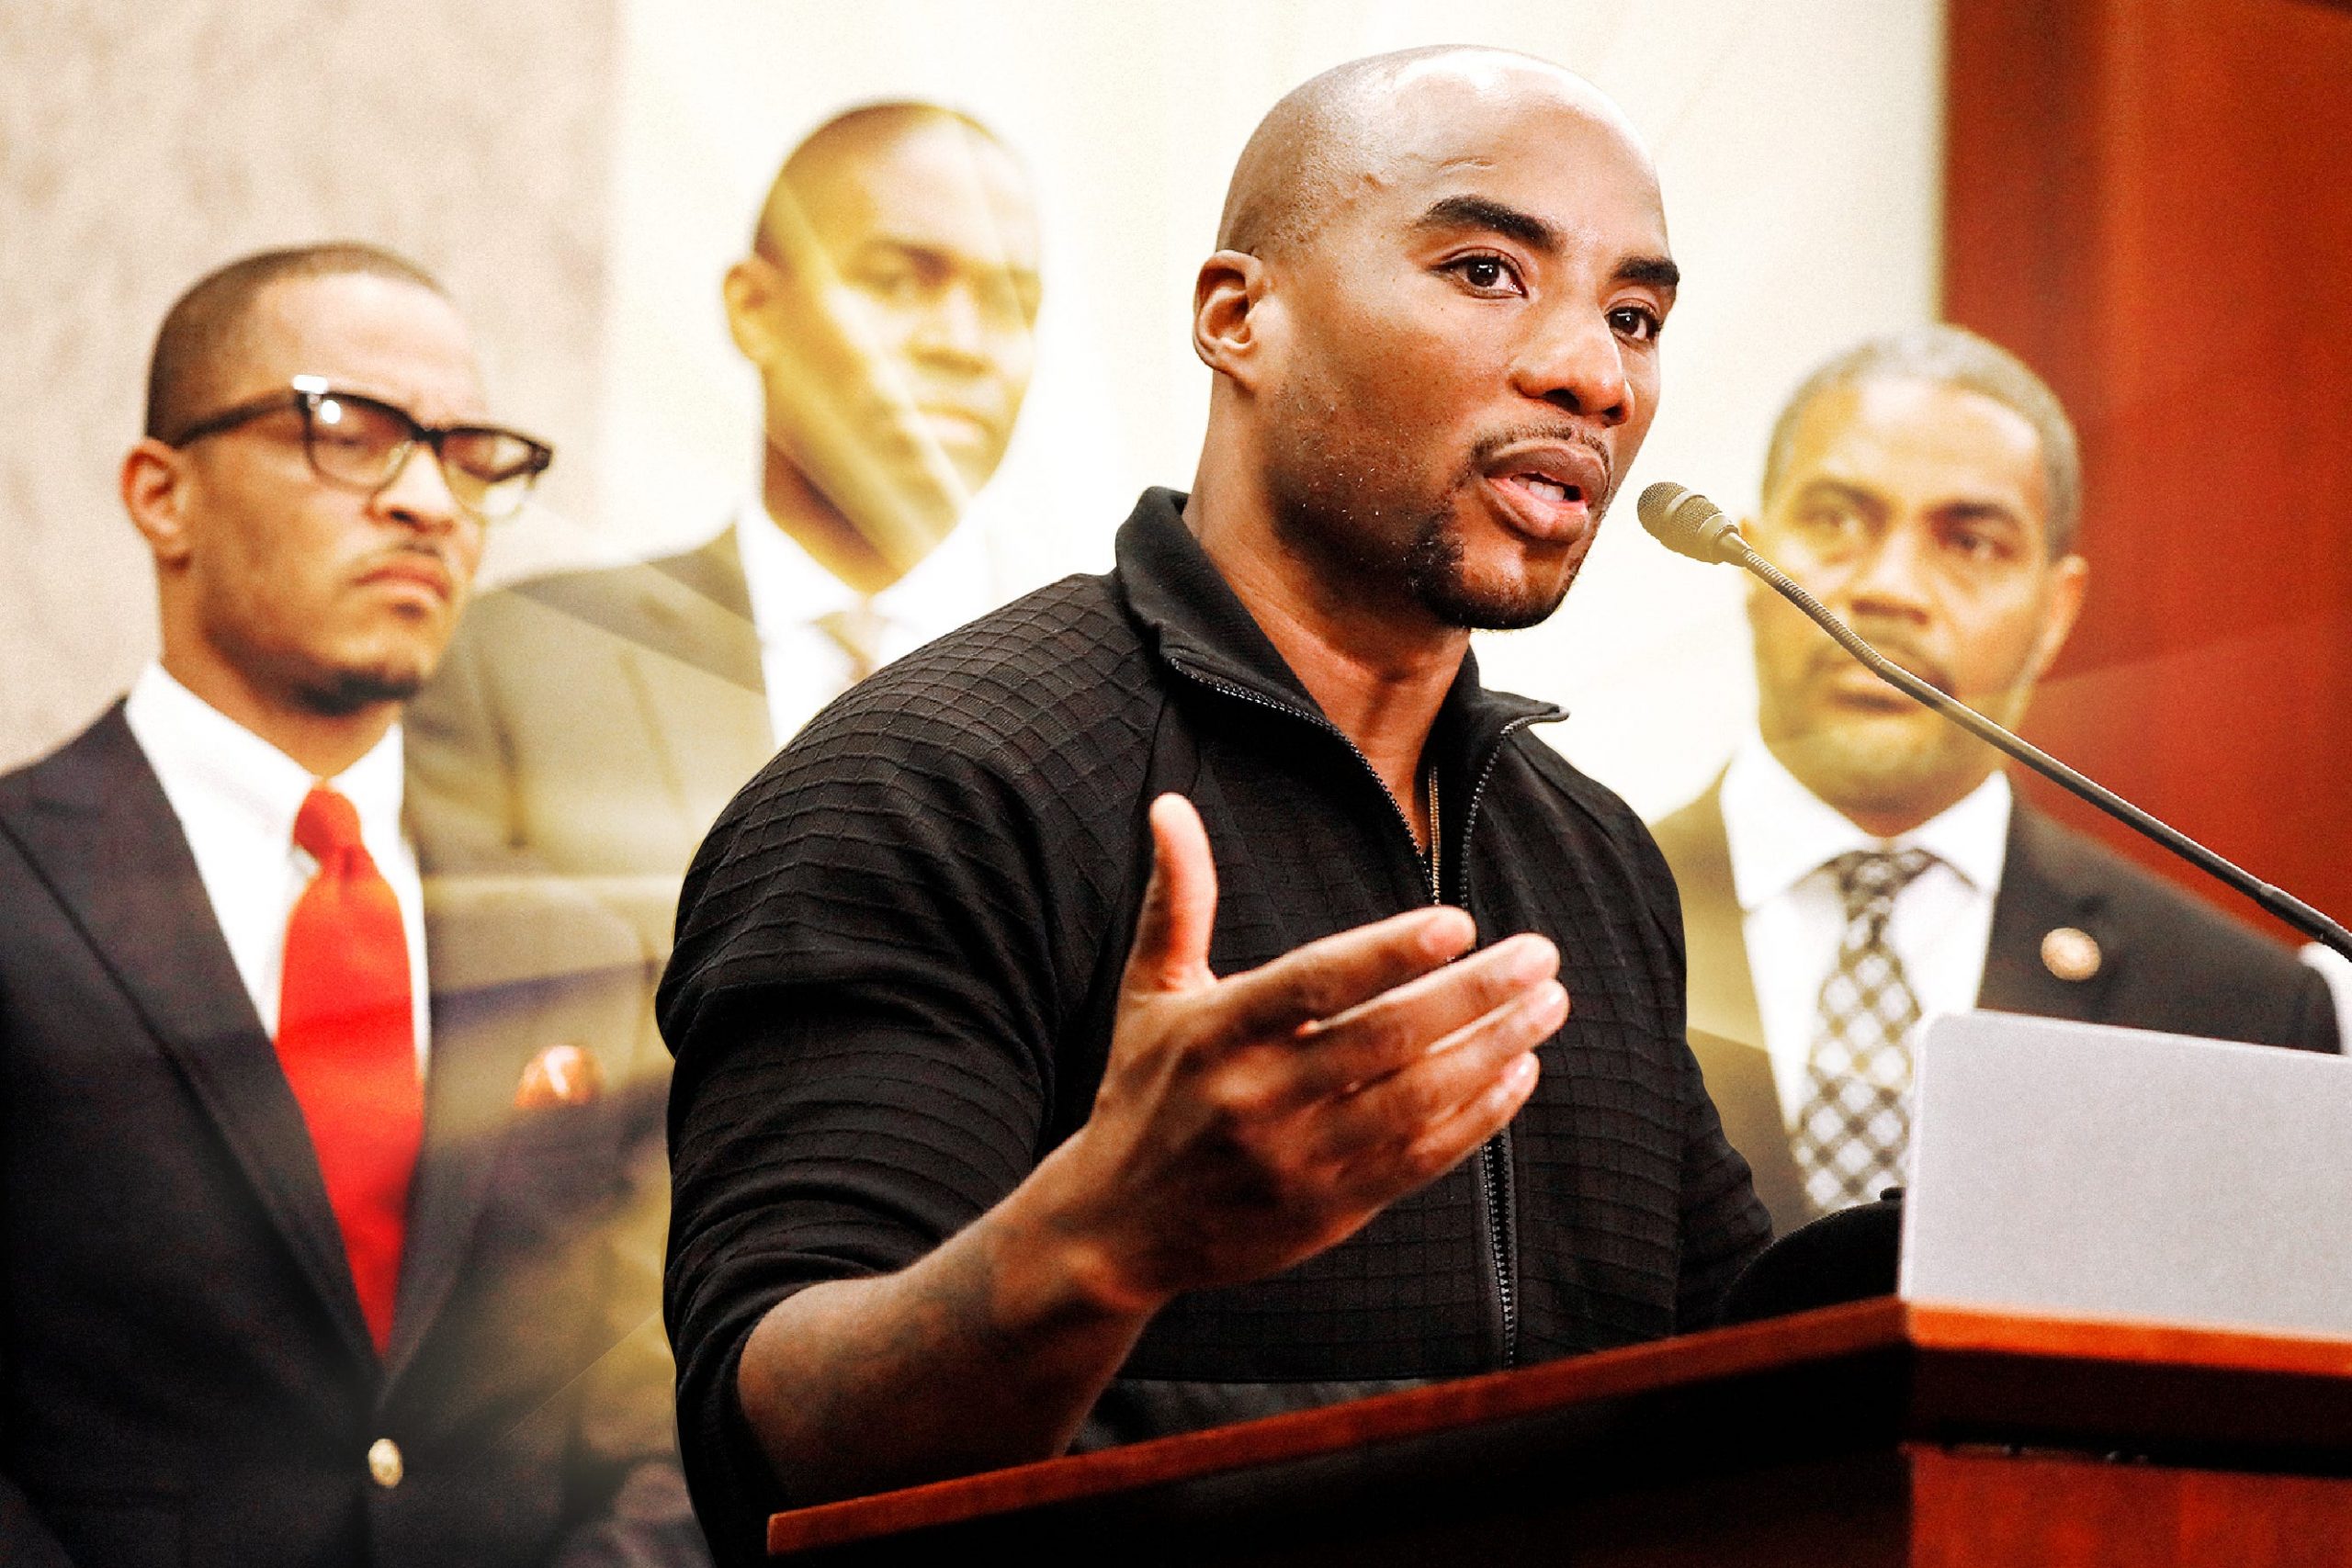 Charlamagne Tha God with a golden light radiating from behind him with Clifford “T.I.” Harris, Re. Antonio Delgado (D-NY), and Steven Horsford (D-NV) in the background.